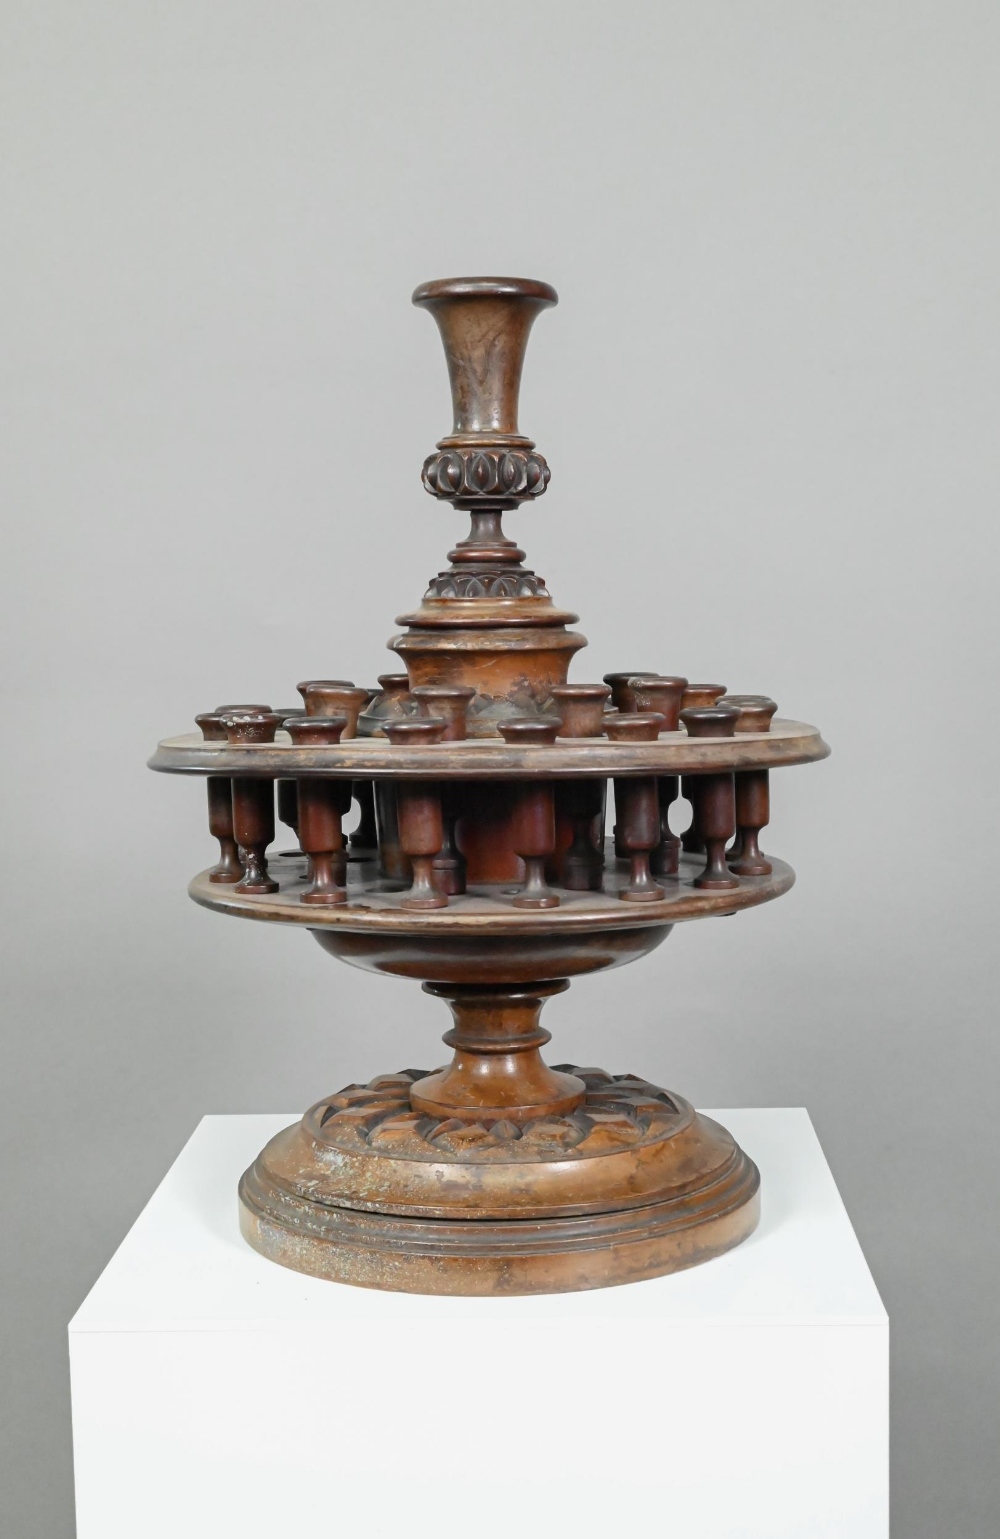 An antique carved and turned wood snuff or tobacco stand with sectional central pillar surrounded by